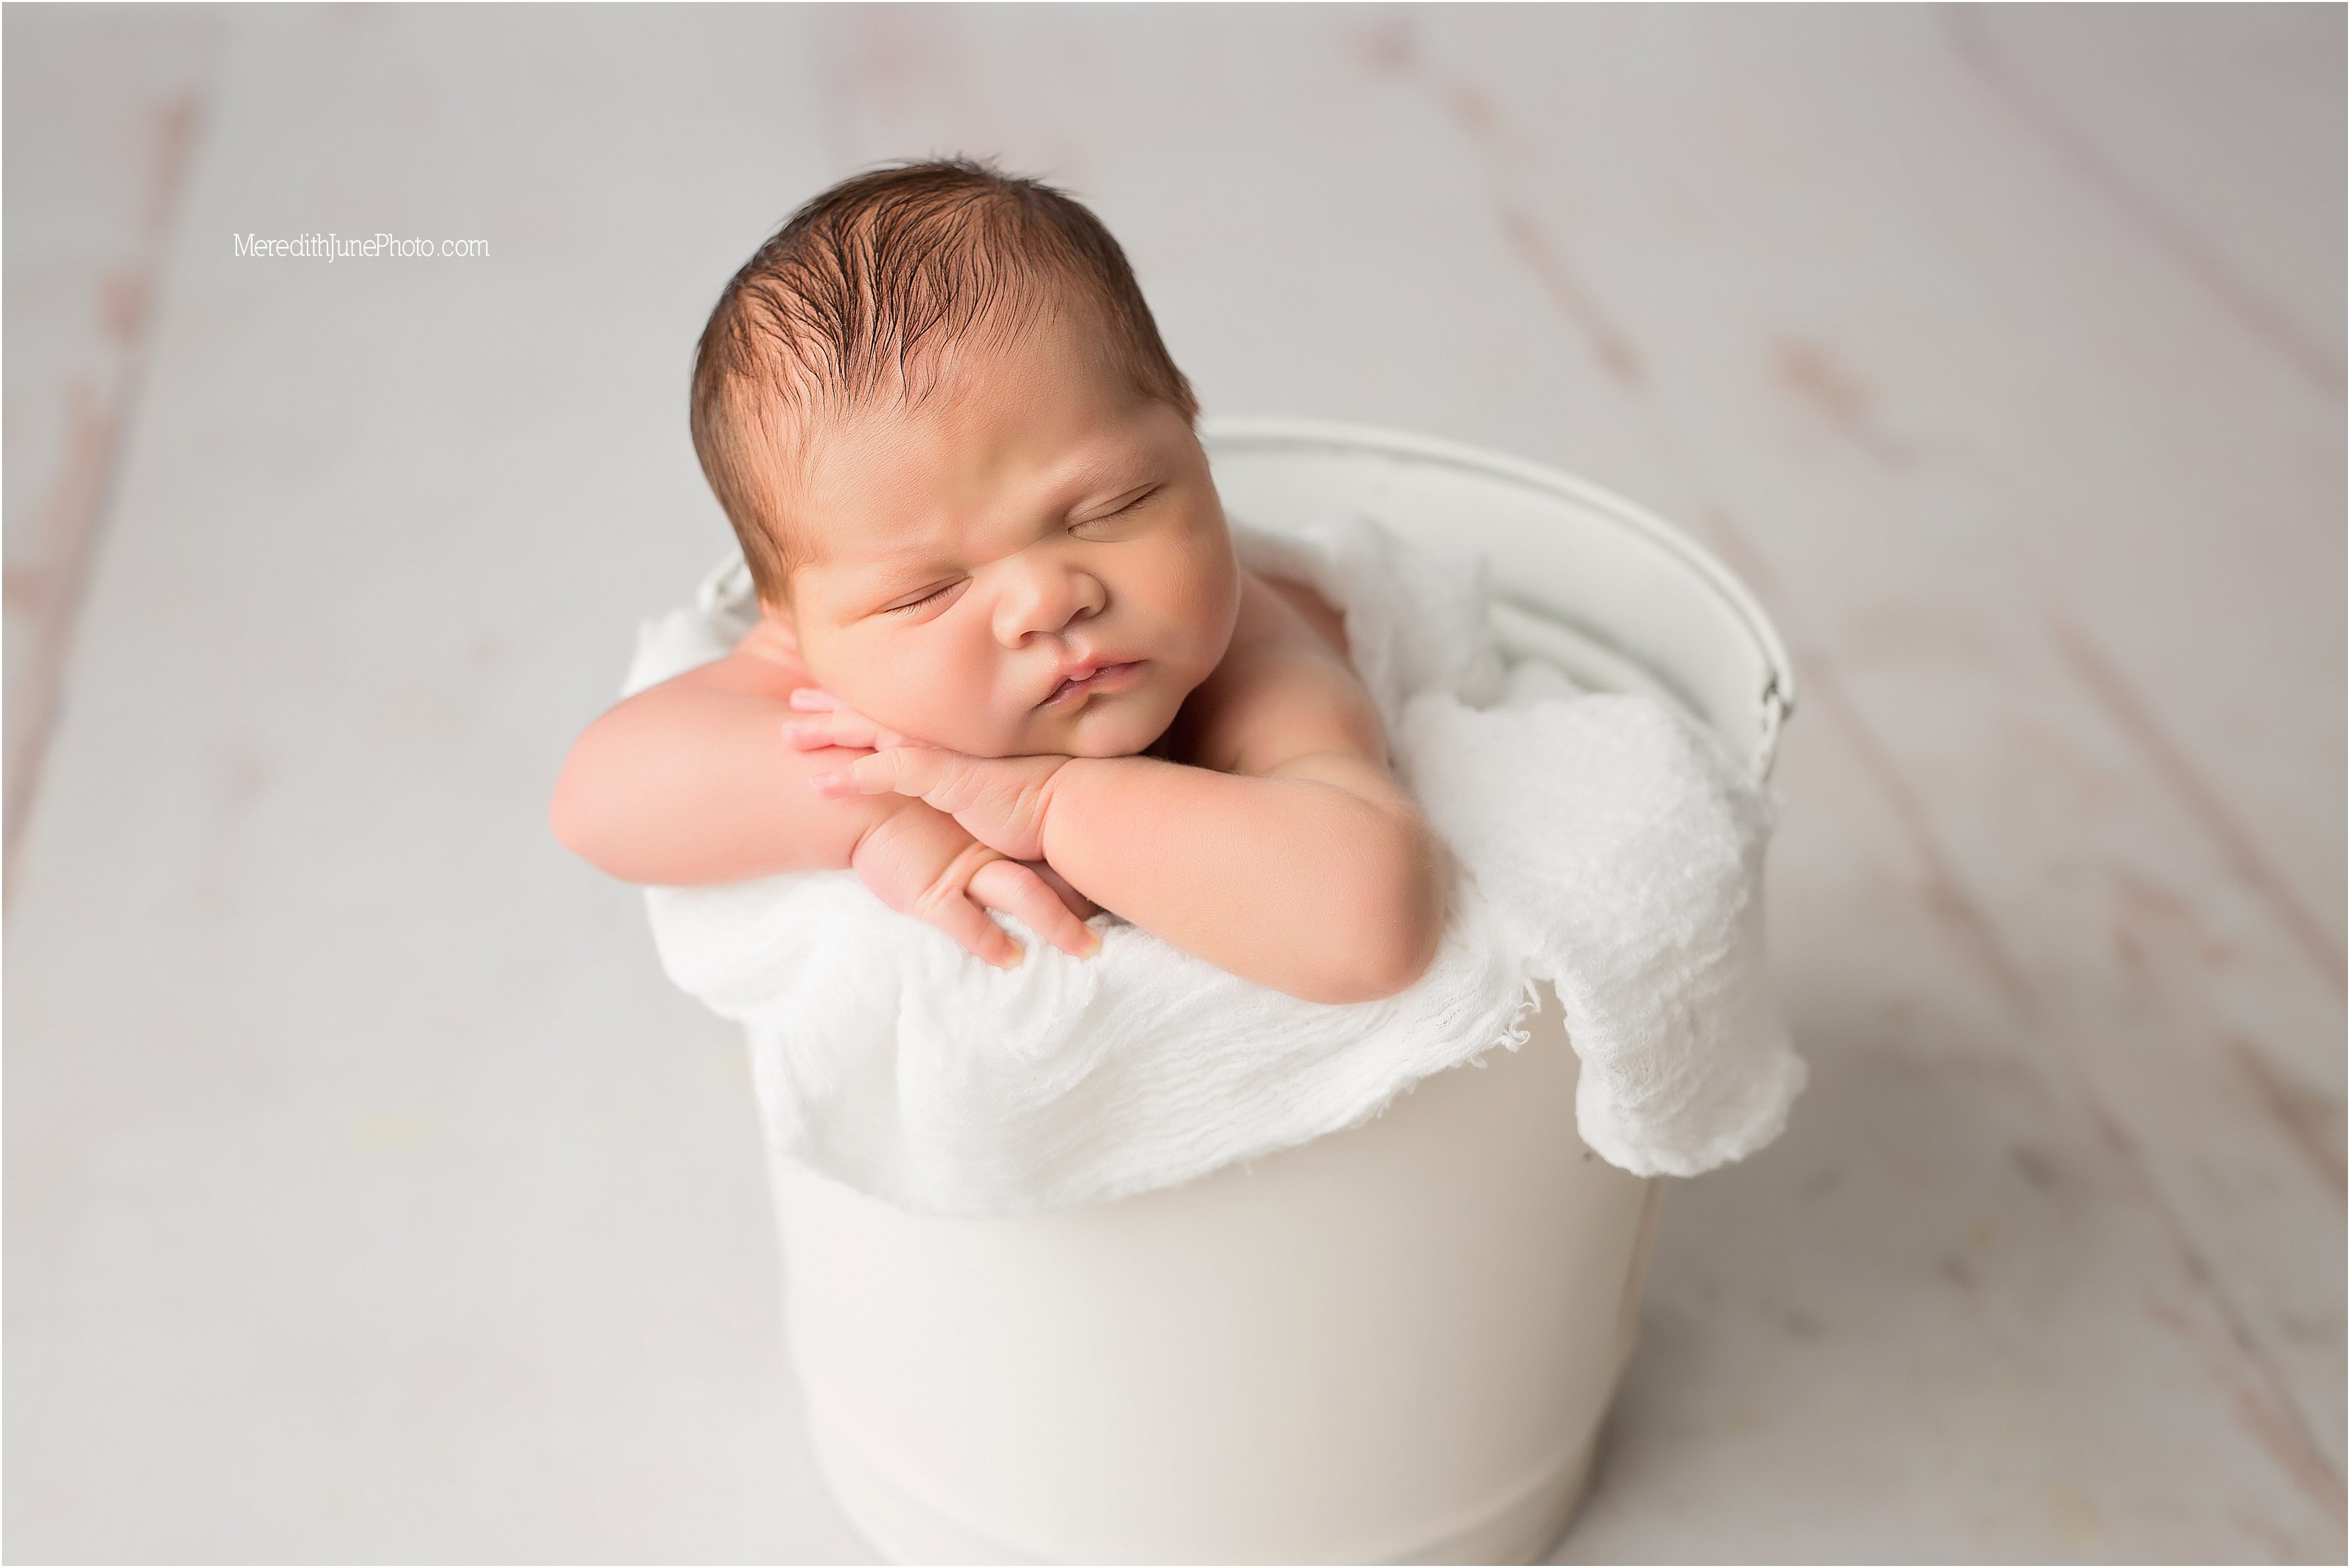 adorable baby boy newborn session at Meredith June Photography 